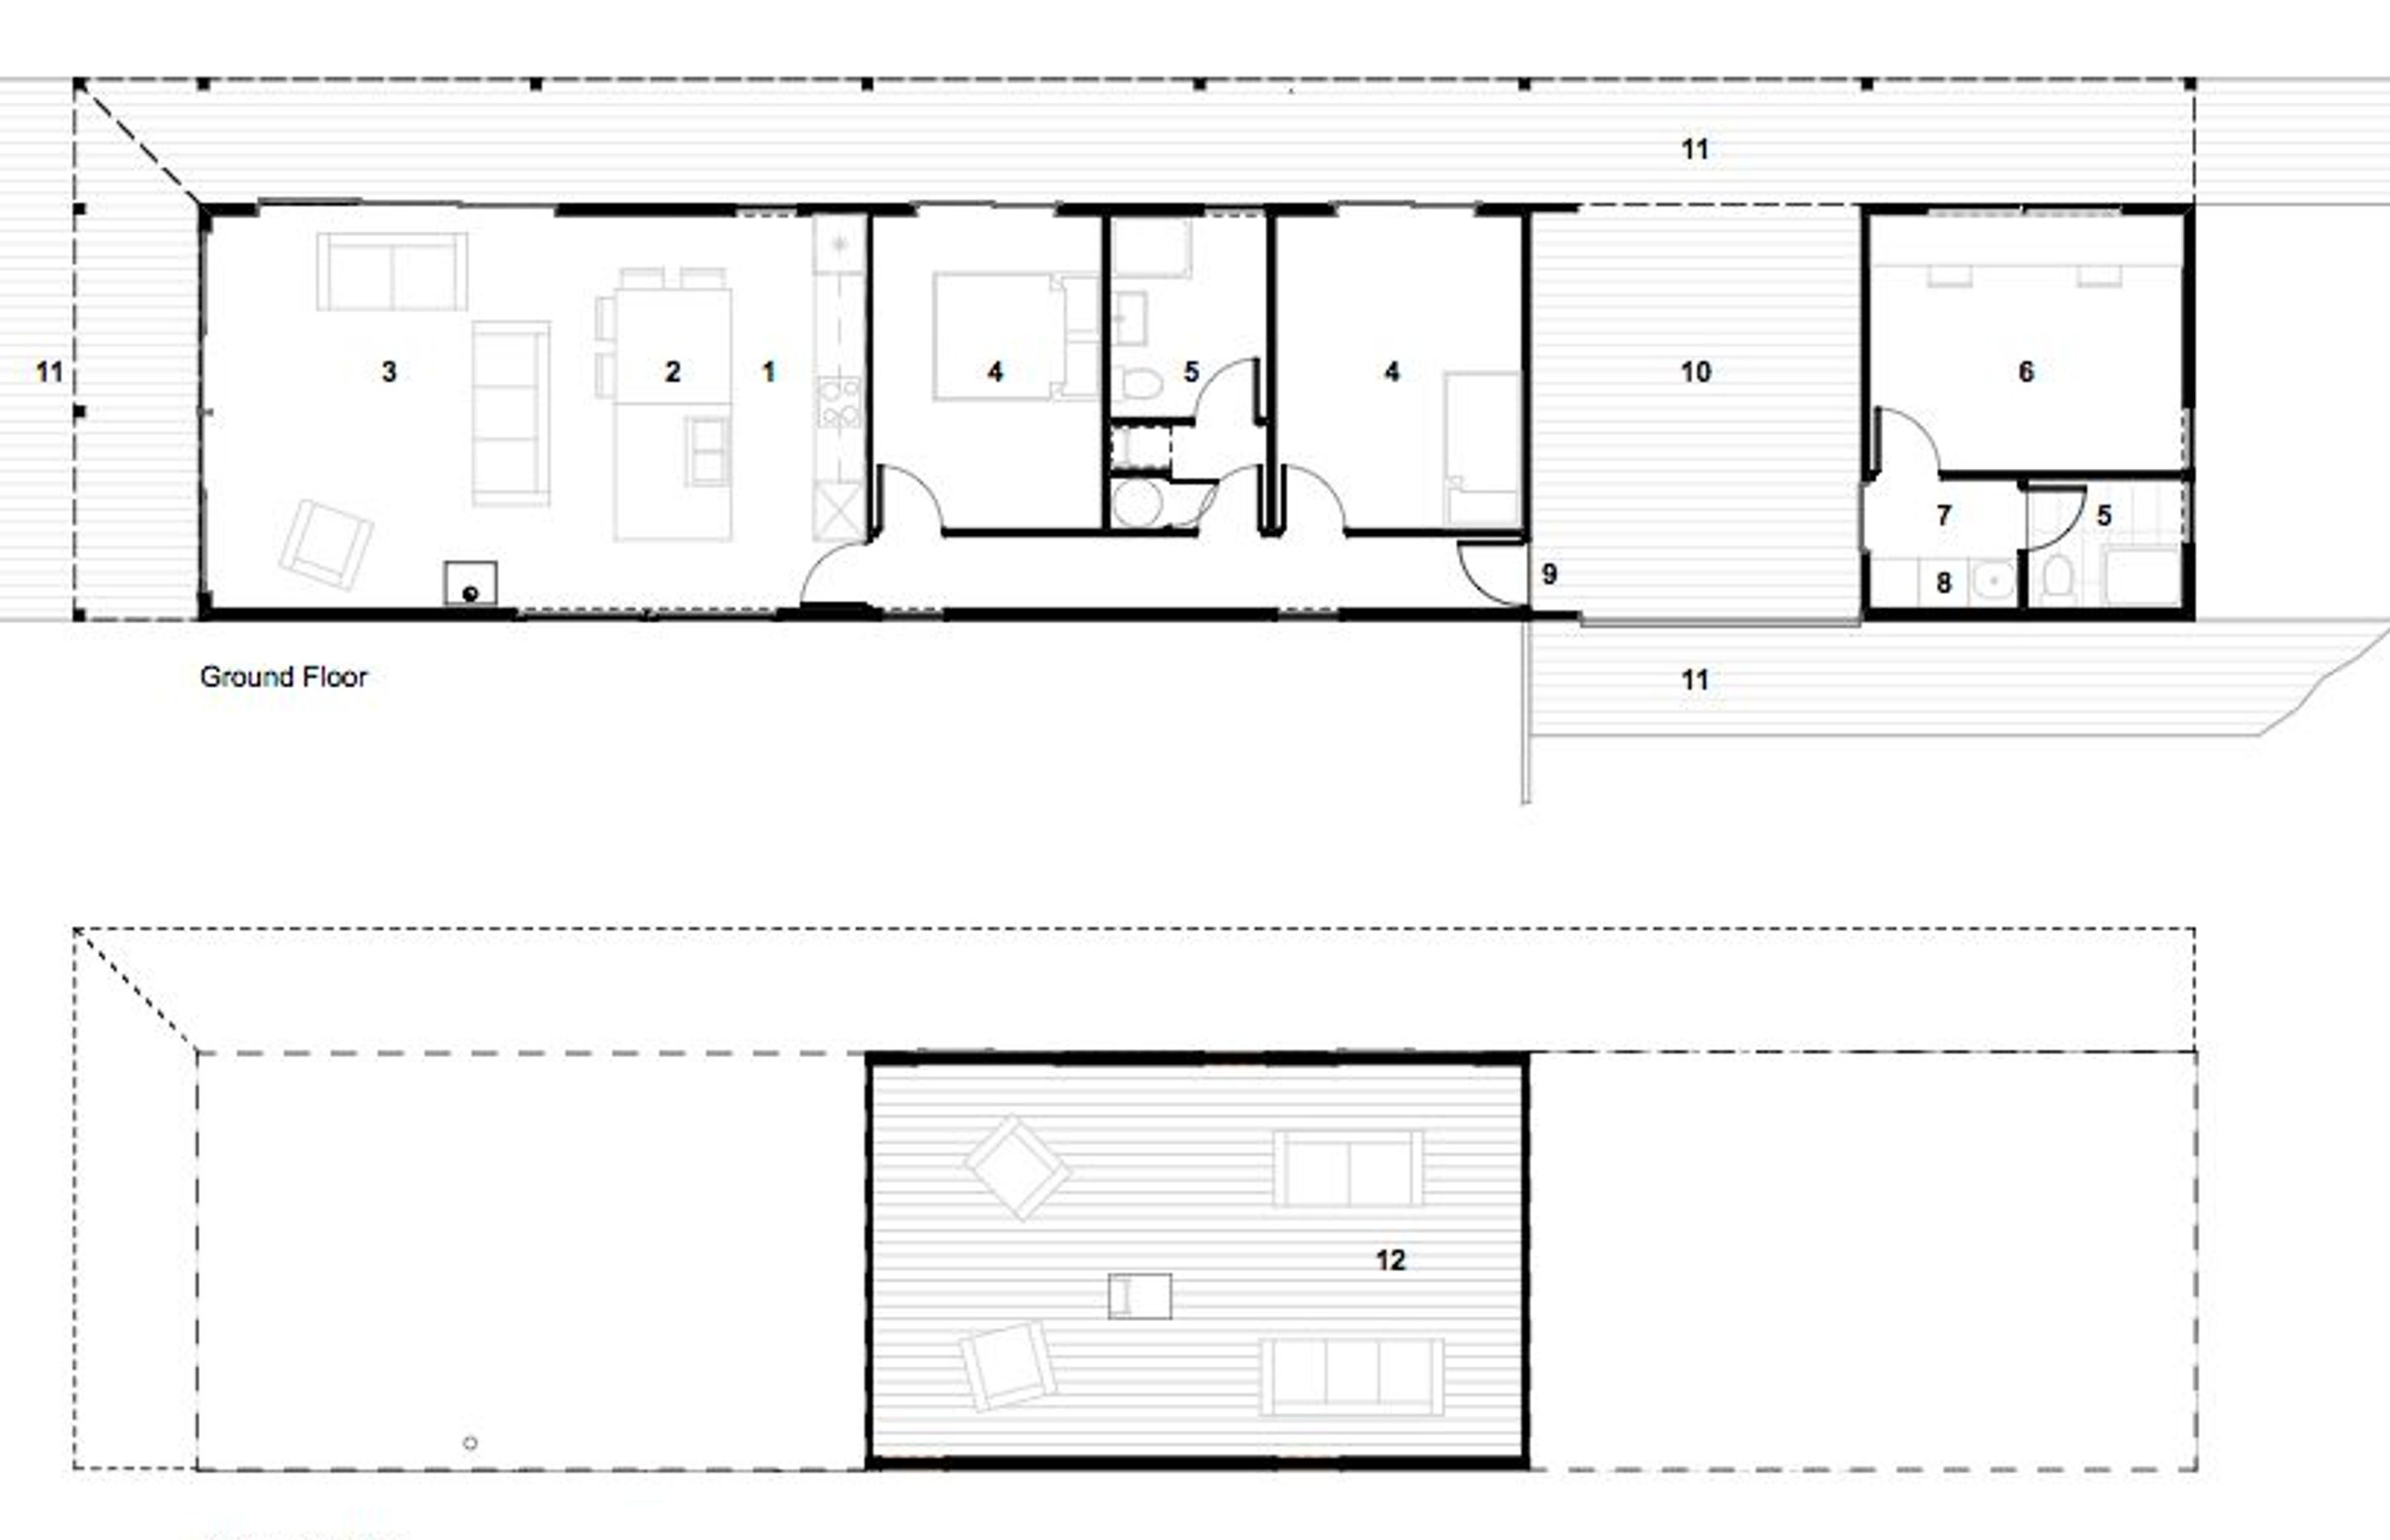 Ground and mezzanine floor plan by MAKE Architects.